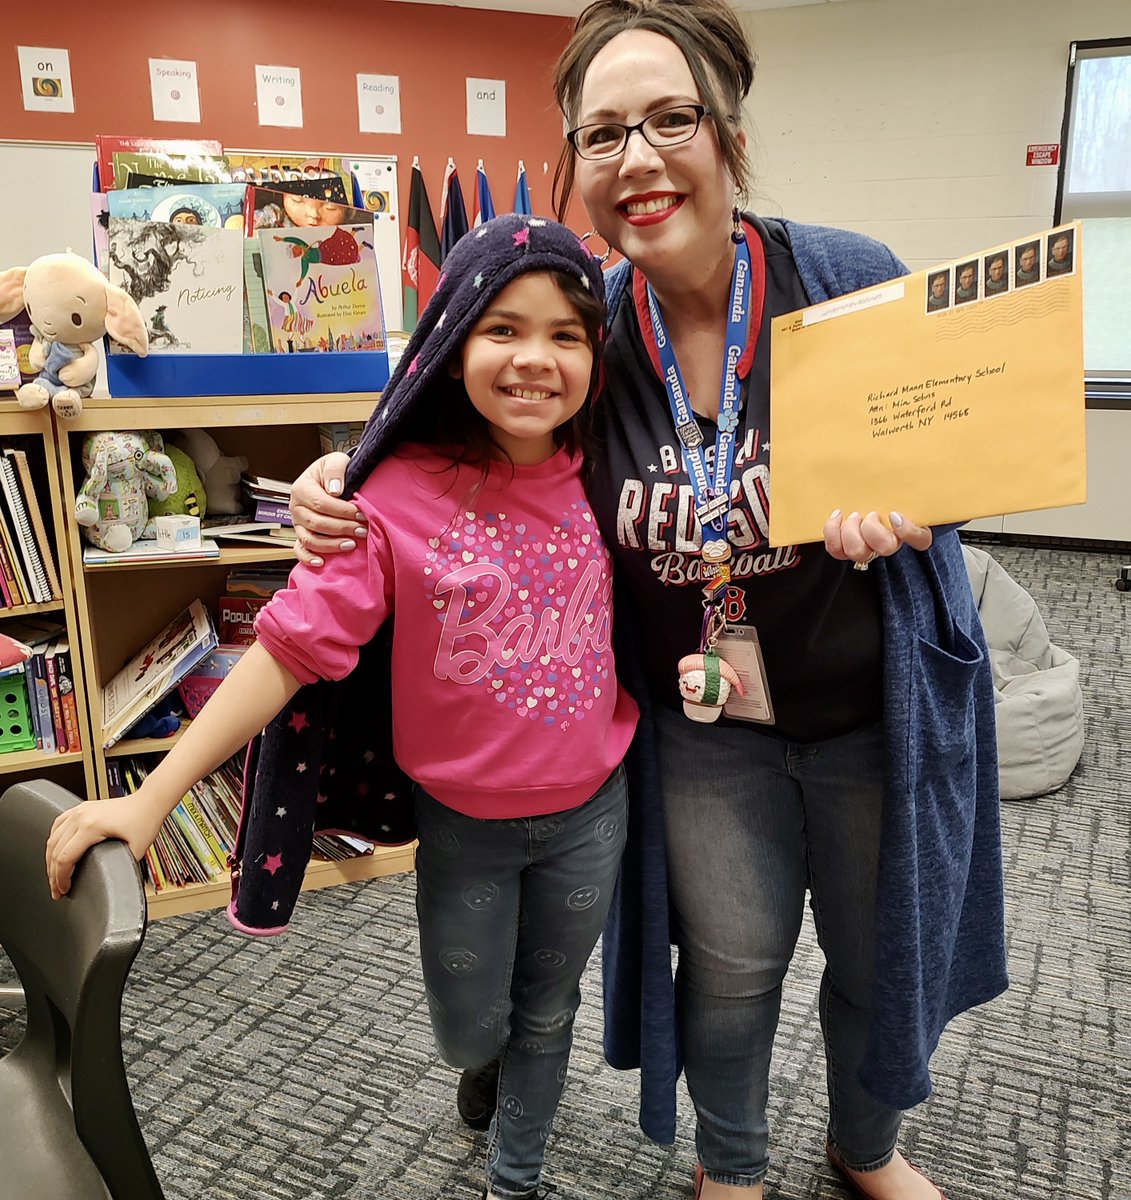 🌕🌟🚀 What happens when you're in 4th grade & your favorite astronaut answers the letter you wrote to her? Your dreams of going to space hit overdrive and Gananda student Daviana is no exception! #GanandaProud Read her story here: rmes.gananda.org/apps/news/arti…